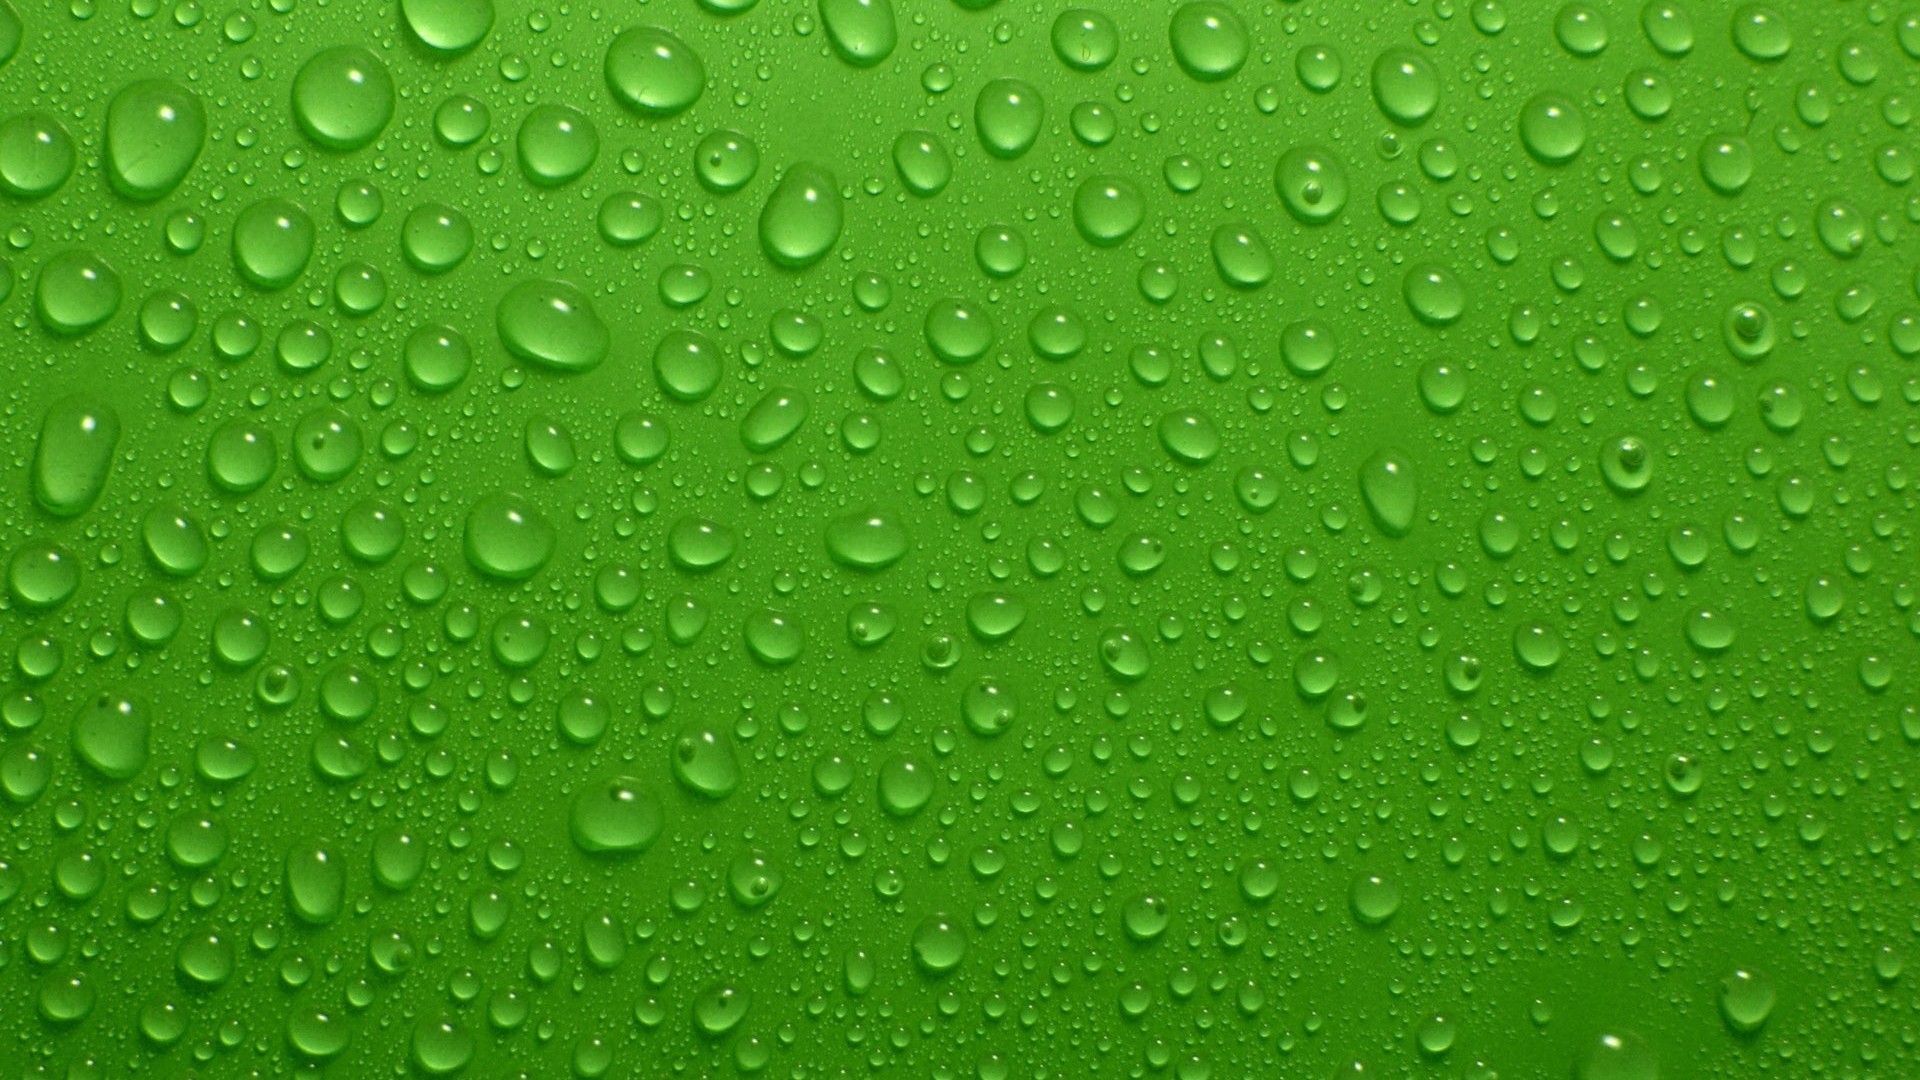 Green Colour Background Wallpaper HD with image resolution 1920x1080 pixel. You can make this wallpaper for your Desktop Computer Backgrounds, Mac Wallpapers, Android Lock screen or iPhone Screensavers